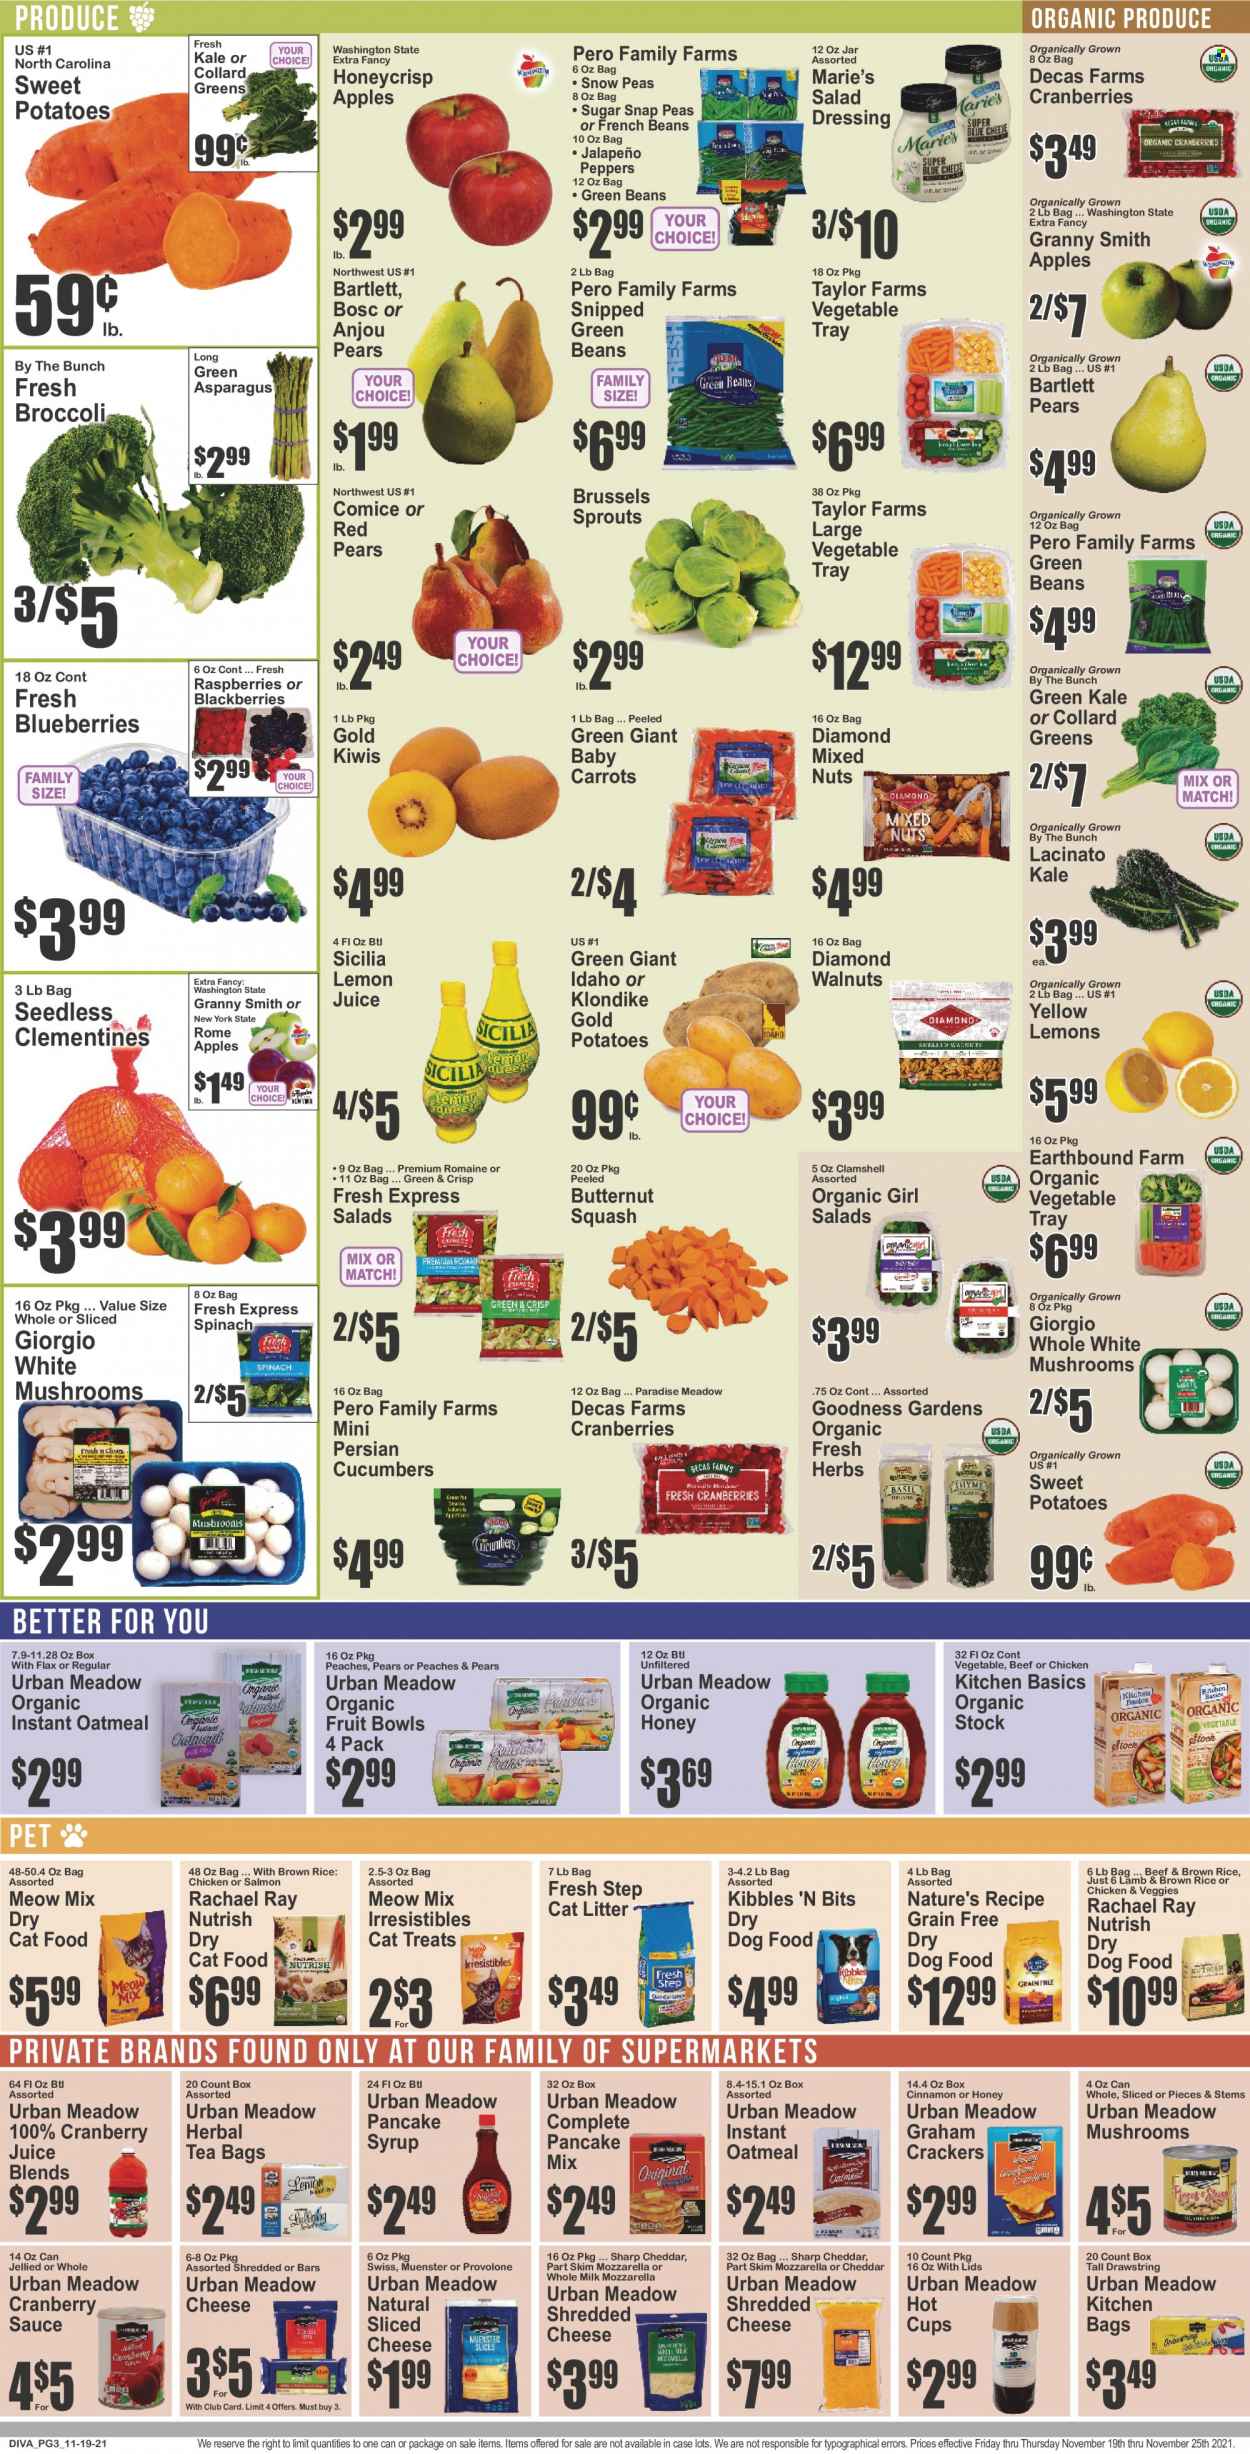 thumbnail - Key Food Flyer - 11/19/2021 - 11/25/2021 - Sales products - Bartlett pears, beans, broccoli, cucumber, collard greens, french beans, green beans, sweet potato, kale, potatoes, jalapeño, brussel sprouts, apples, blackberries, kiwi, pears, Granny Smith, sauce, mozzarella, shredded cheese, sliced cheese, Münster cheese, Provolone, milk, snap peas, snow peas, graham crackers, crackers, oatmeal, cranberries, cinnamon, salad dressing, dressing, cranberry sauce, pancake syrup, syrup, walnuts, mixed nuts, cranberry juice, lemon juice, herbal tea, tea bags, tray, cup, cat litter, animal food, cat food, dog food, dry dog food, dry cat food, Meow Mix, Fresh Step, Nutrish, butternut squash, clementines, peaches. Page 3.